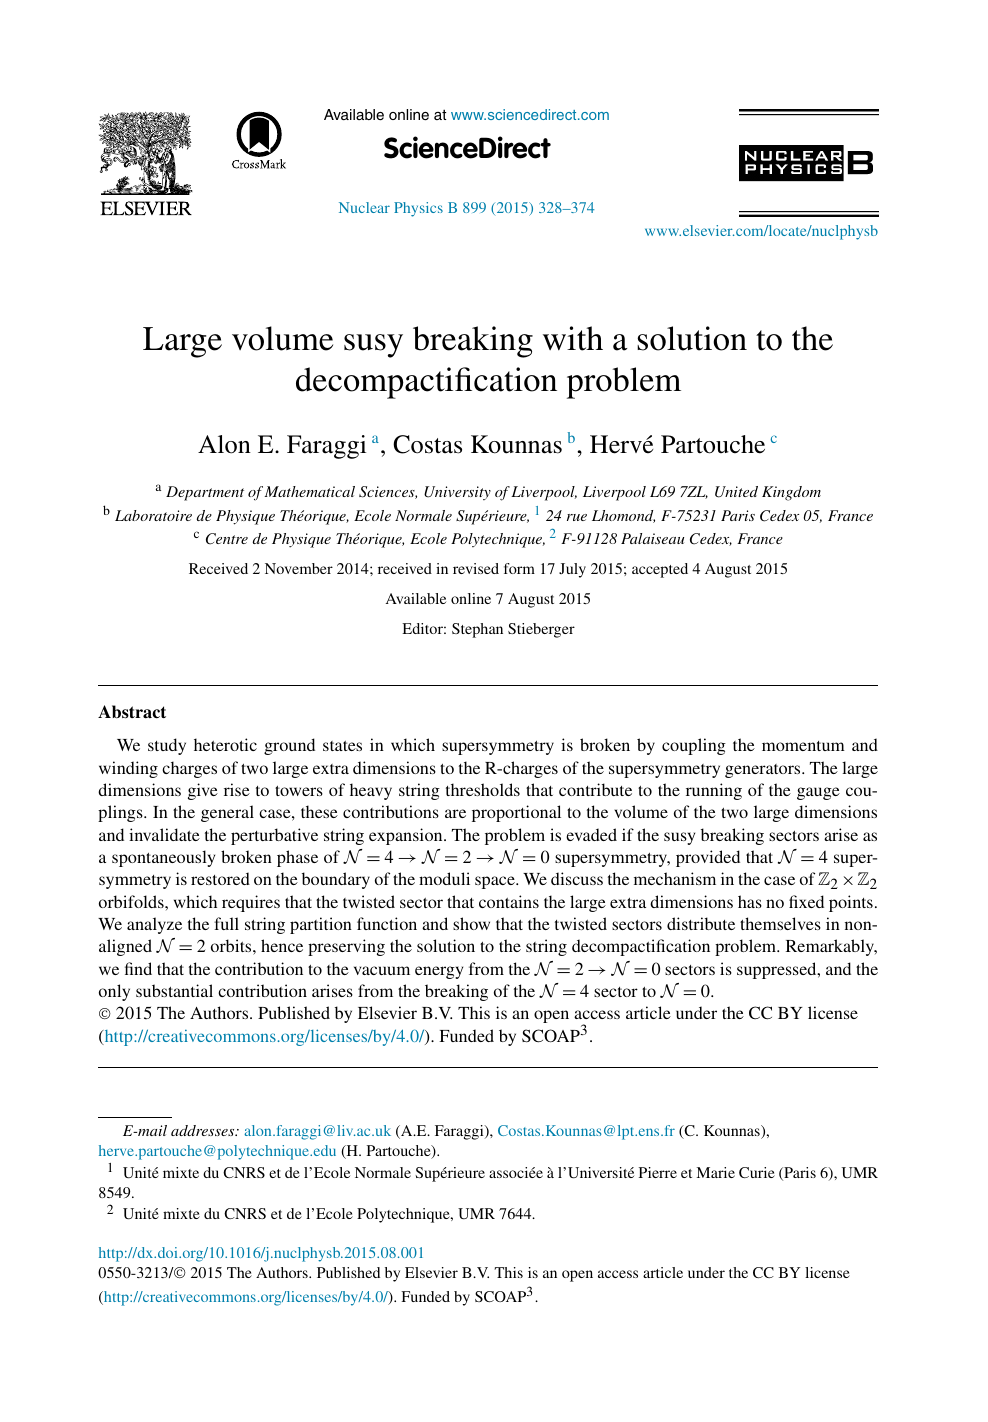 Large Volume Susy Breaking With A Solution To The Decompactification Problem Topic Of Research Paper In Physical Sciences Download Scholarly Article Pdf And Read For Free On Cyberleninka Open Science Hub